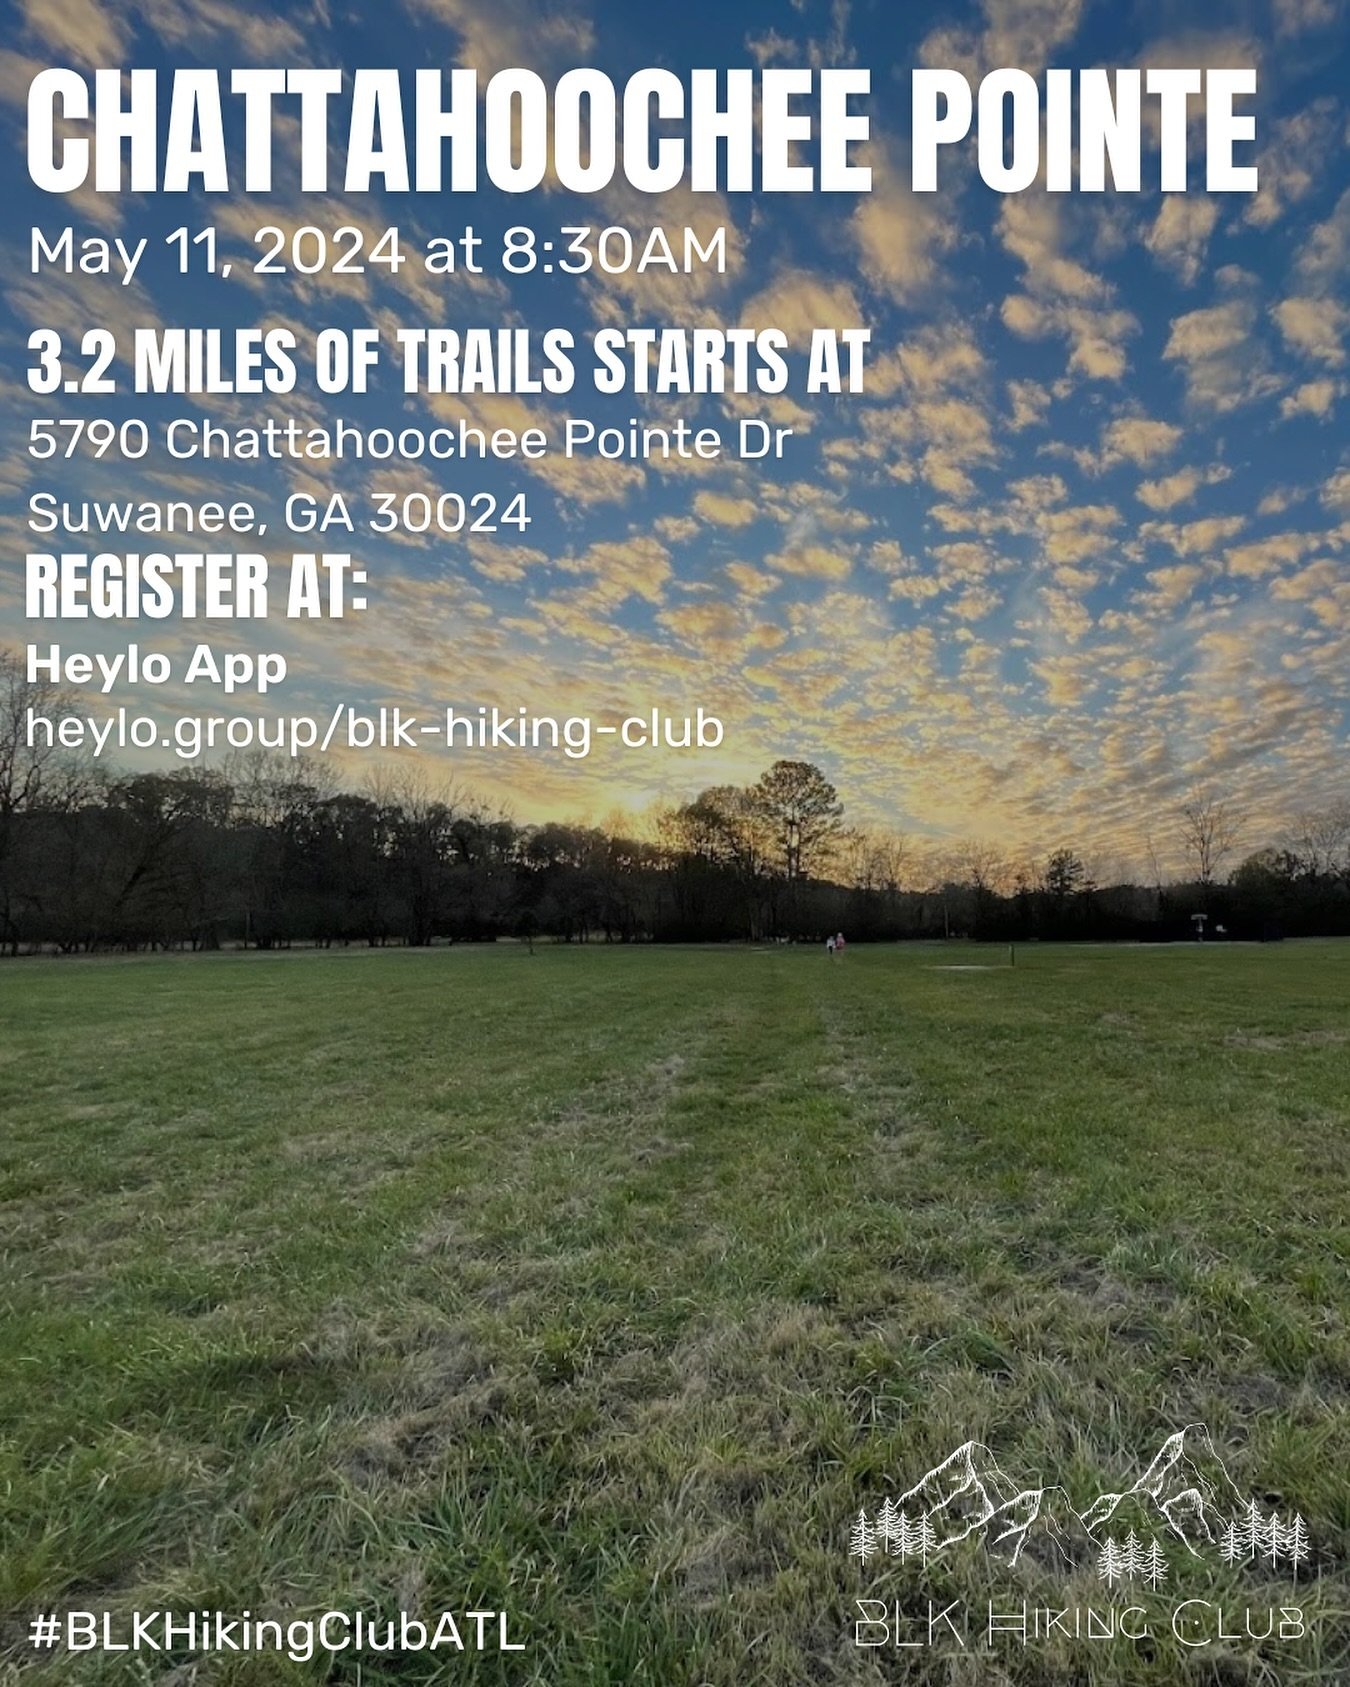 UPDATE: Waitlist only. All spots are filled on the active list currently.
🚨🚨HIKING ANNOUNCEMENT🚨🚨
Sunday, May 11th we return to the hiking trails! This adventure will take place Chattahoochee Pointe. Let&rsquo;s take over the trails once again! W